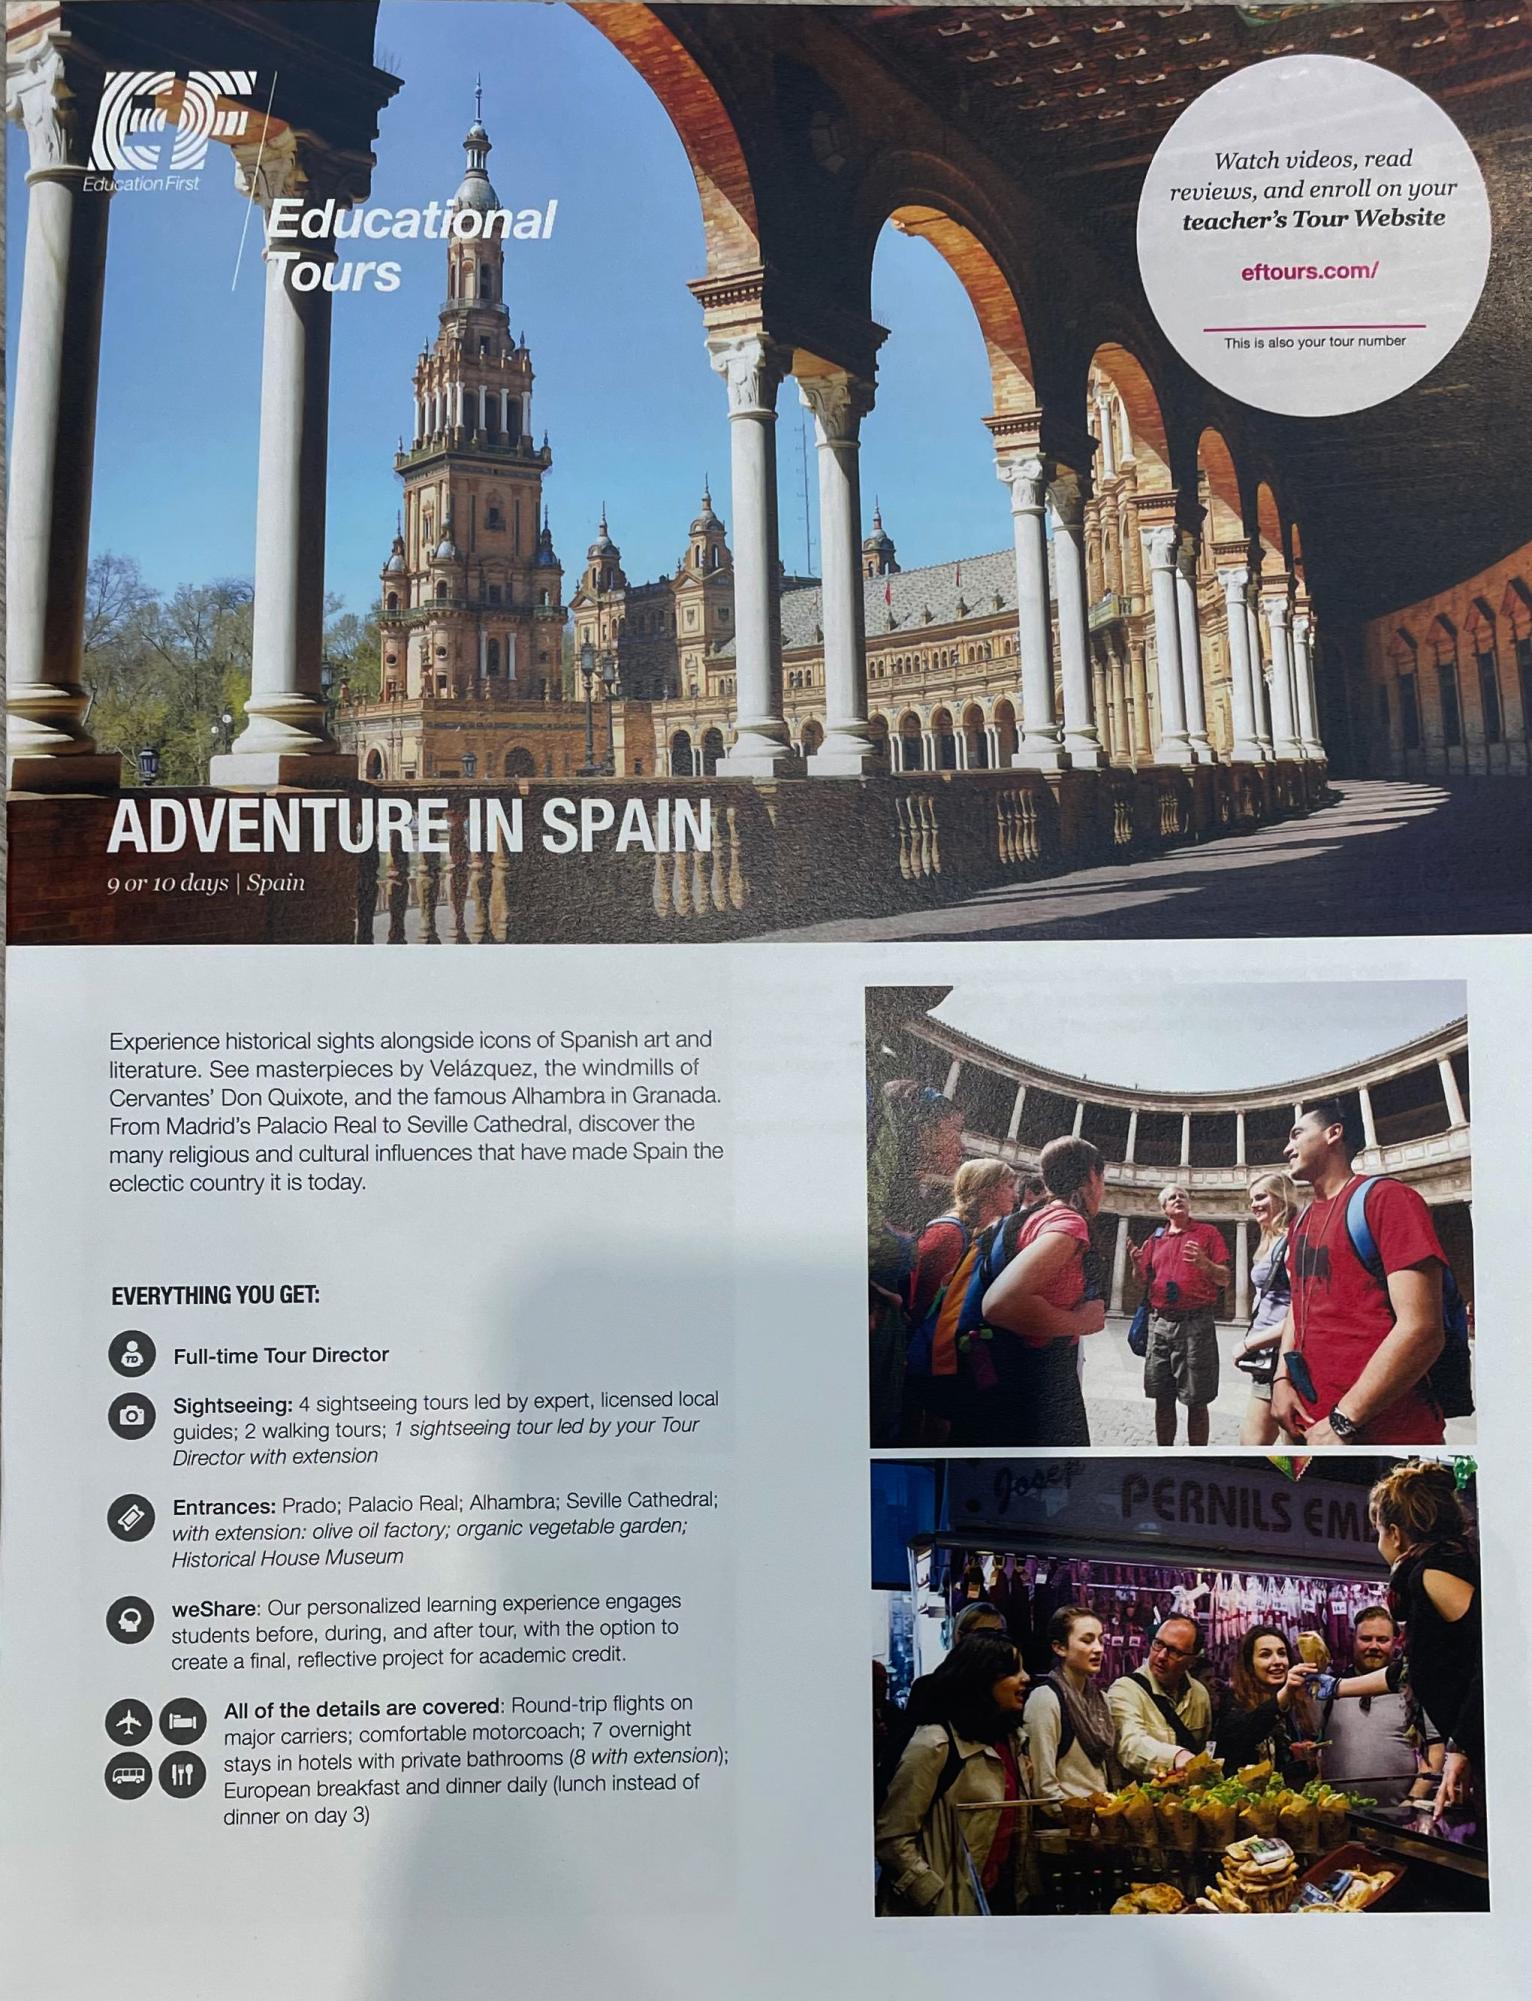 Students enrolled in Spanish at DGS get the opportunity to go on the EF tour of Spain called “Adventure in Spain”.